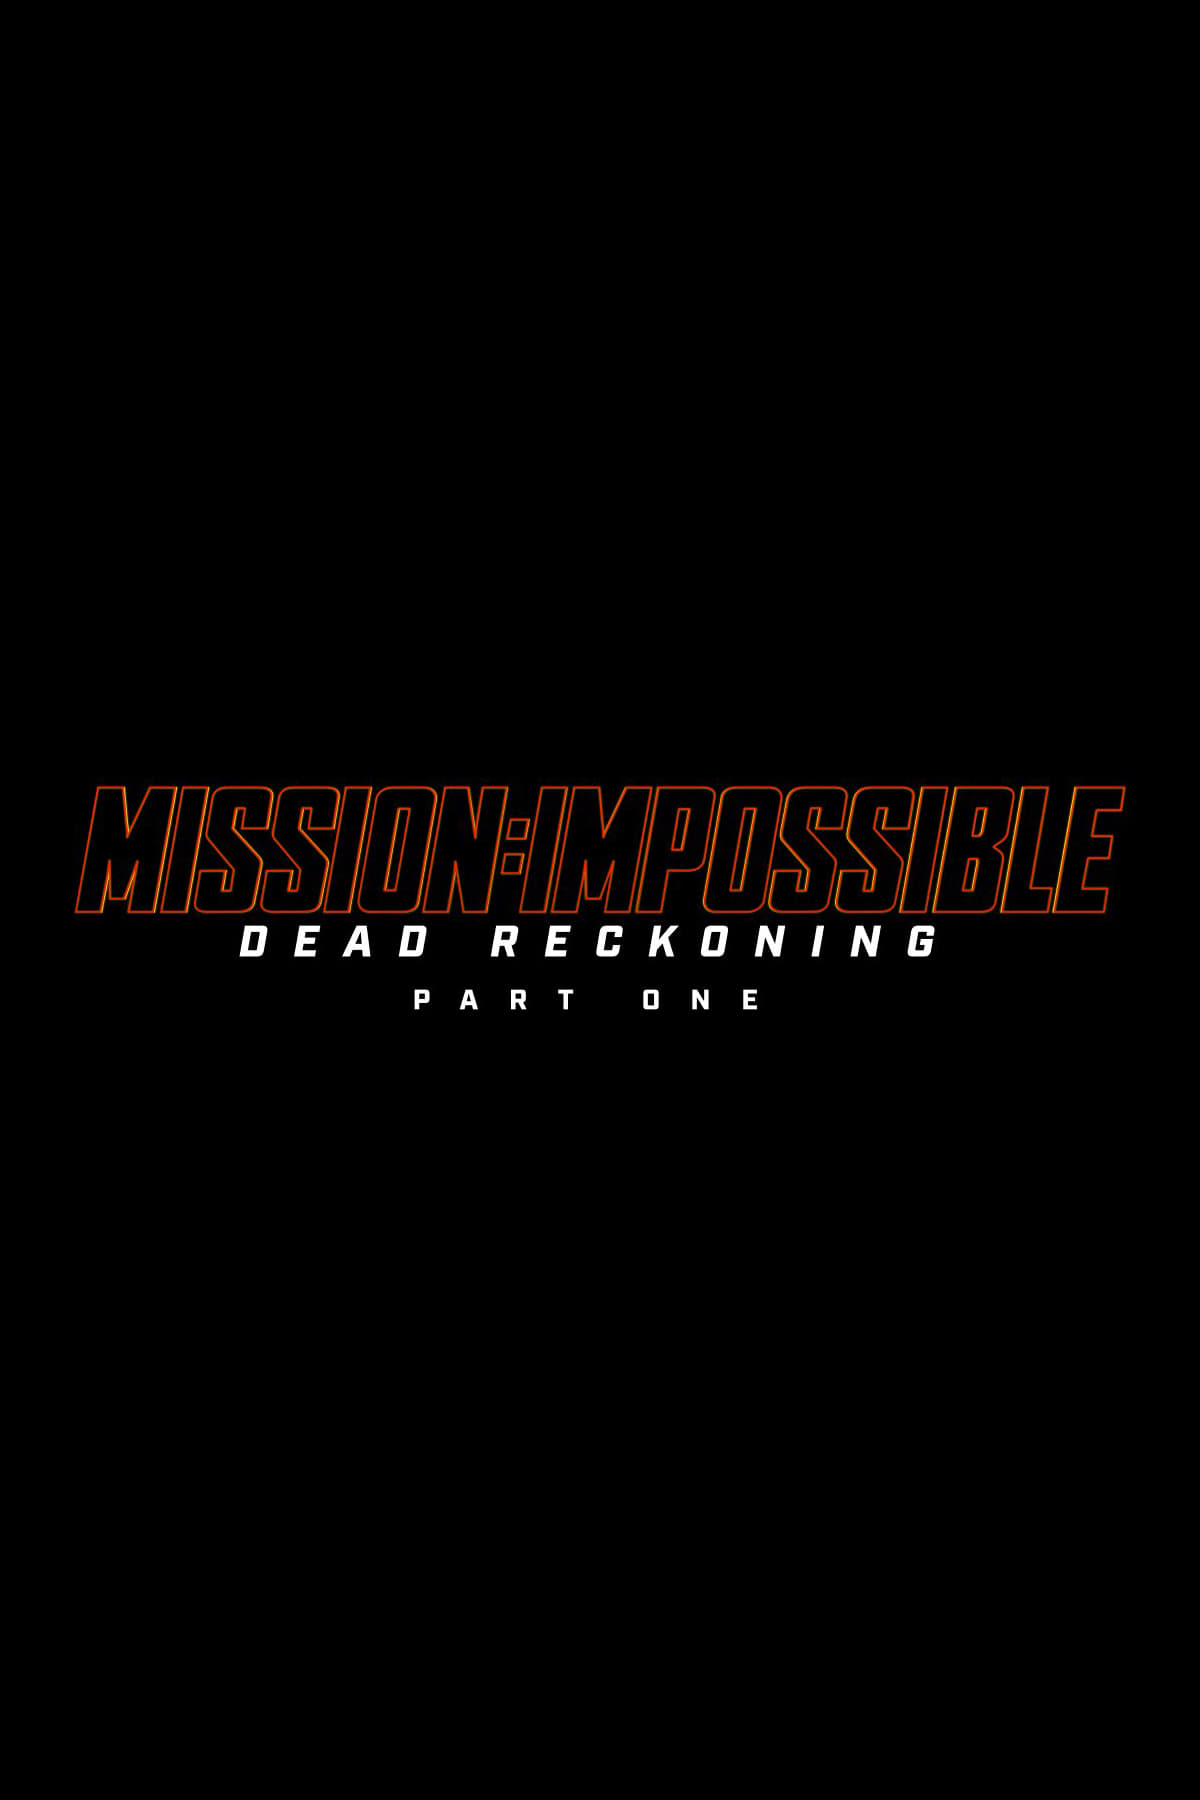 Poster for the movie "Mission: Impossible - Dead Reckoning Part One"